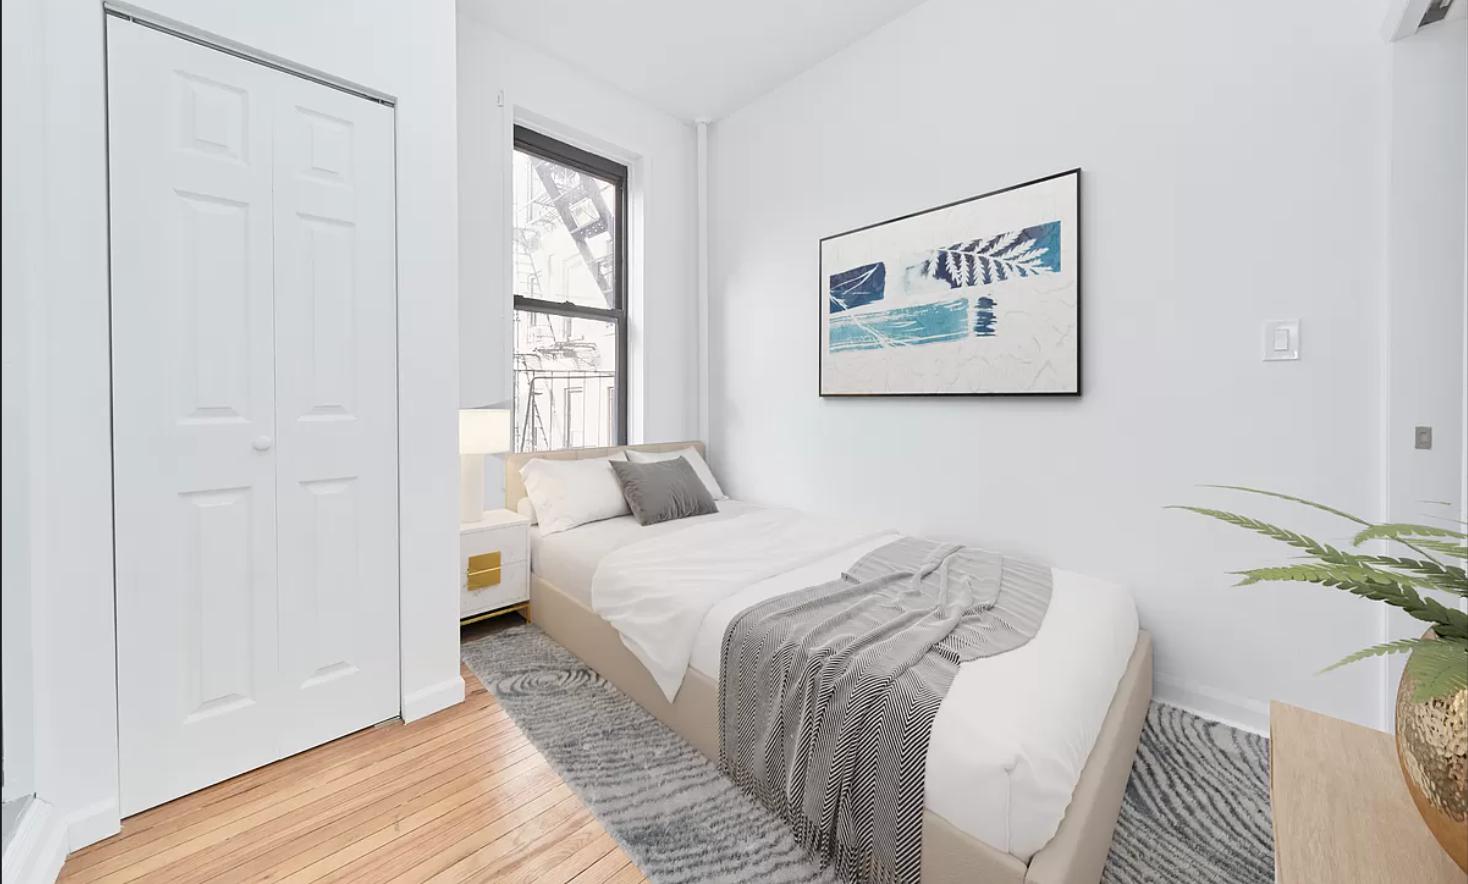 153 Norfolk Street 1E, Lower East Side, Downtown, NYC - 2 Bedrooms  
2 Bathrooms  
4 Rooms - 